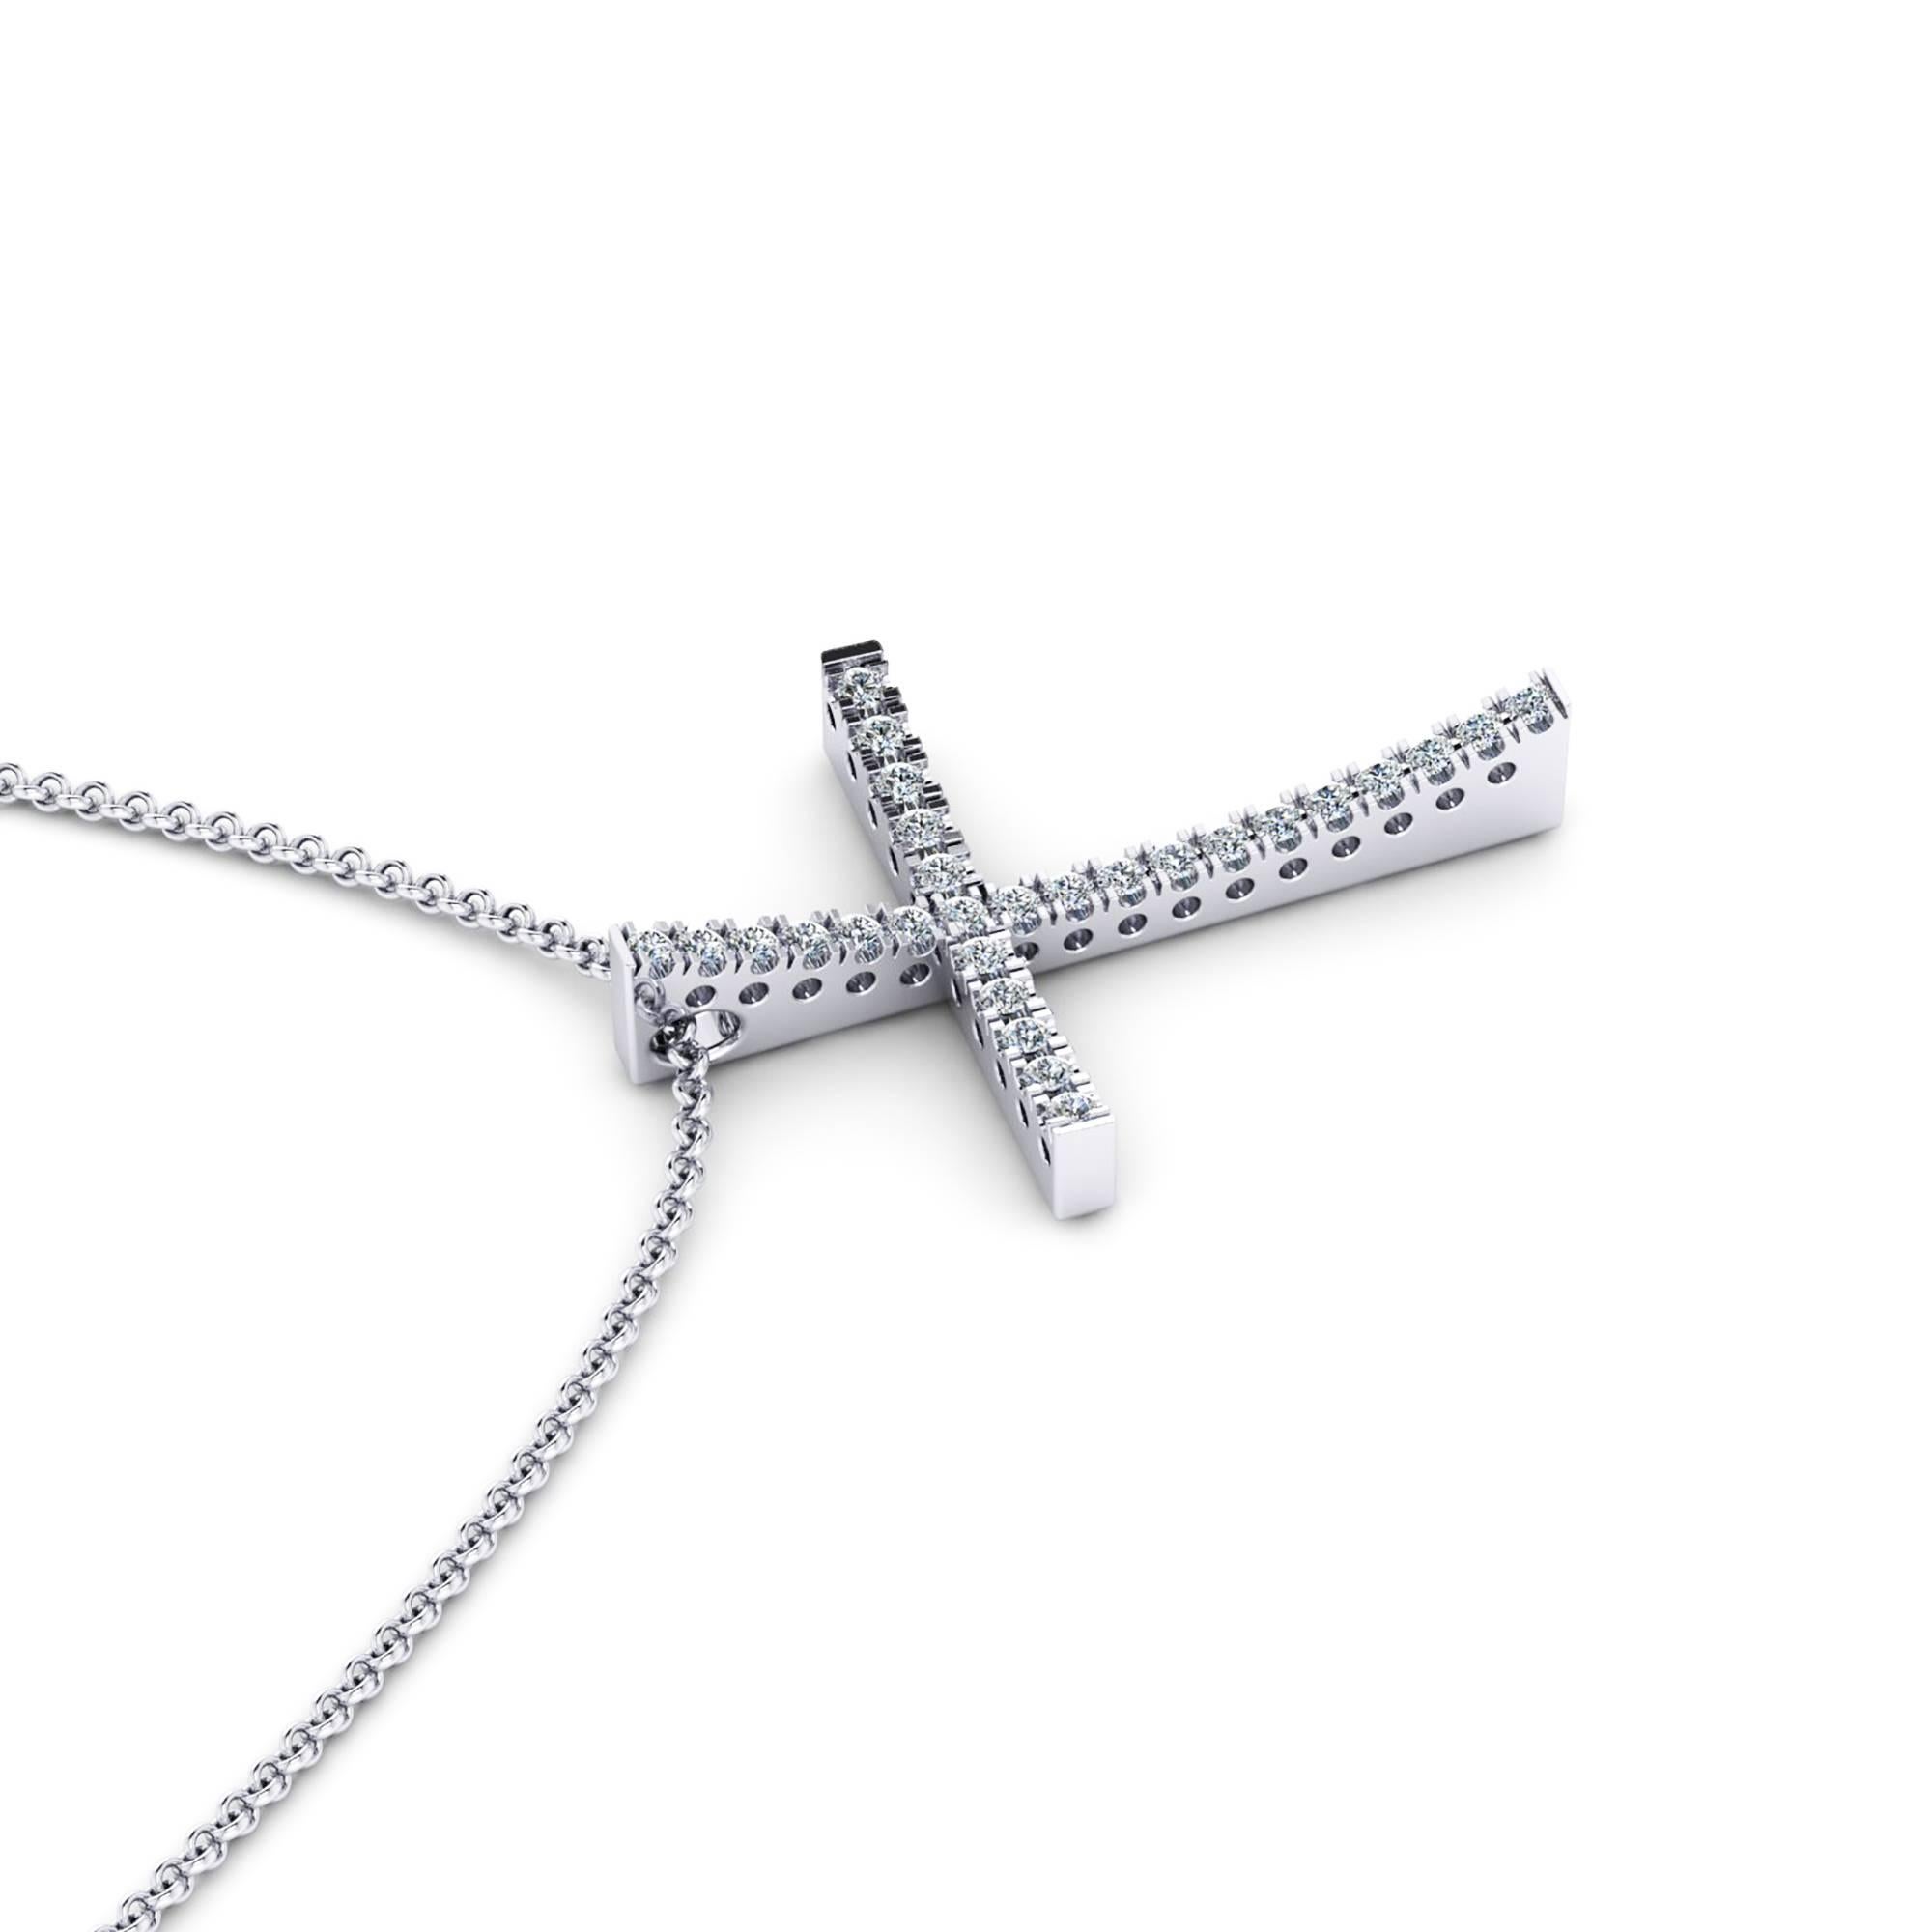 from Ferrucci a 0.28 carat white round diamond cross, conveiced in 18k white gold with a 18k white gold link necklace 20 inches long with the possibility to close it at 18 inches length.

The cross is slightly above 1 inch in lenght and 0.7 inch in